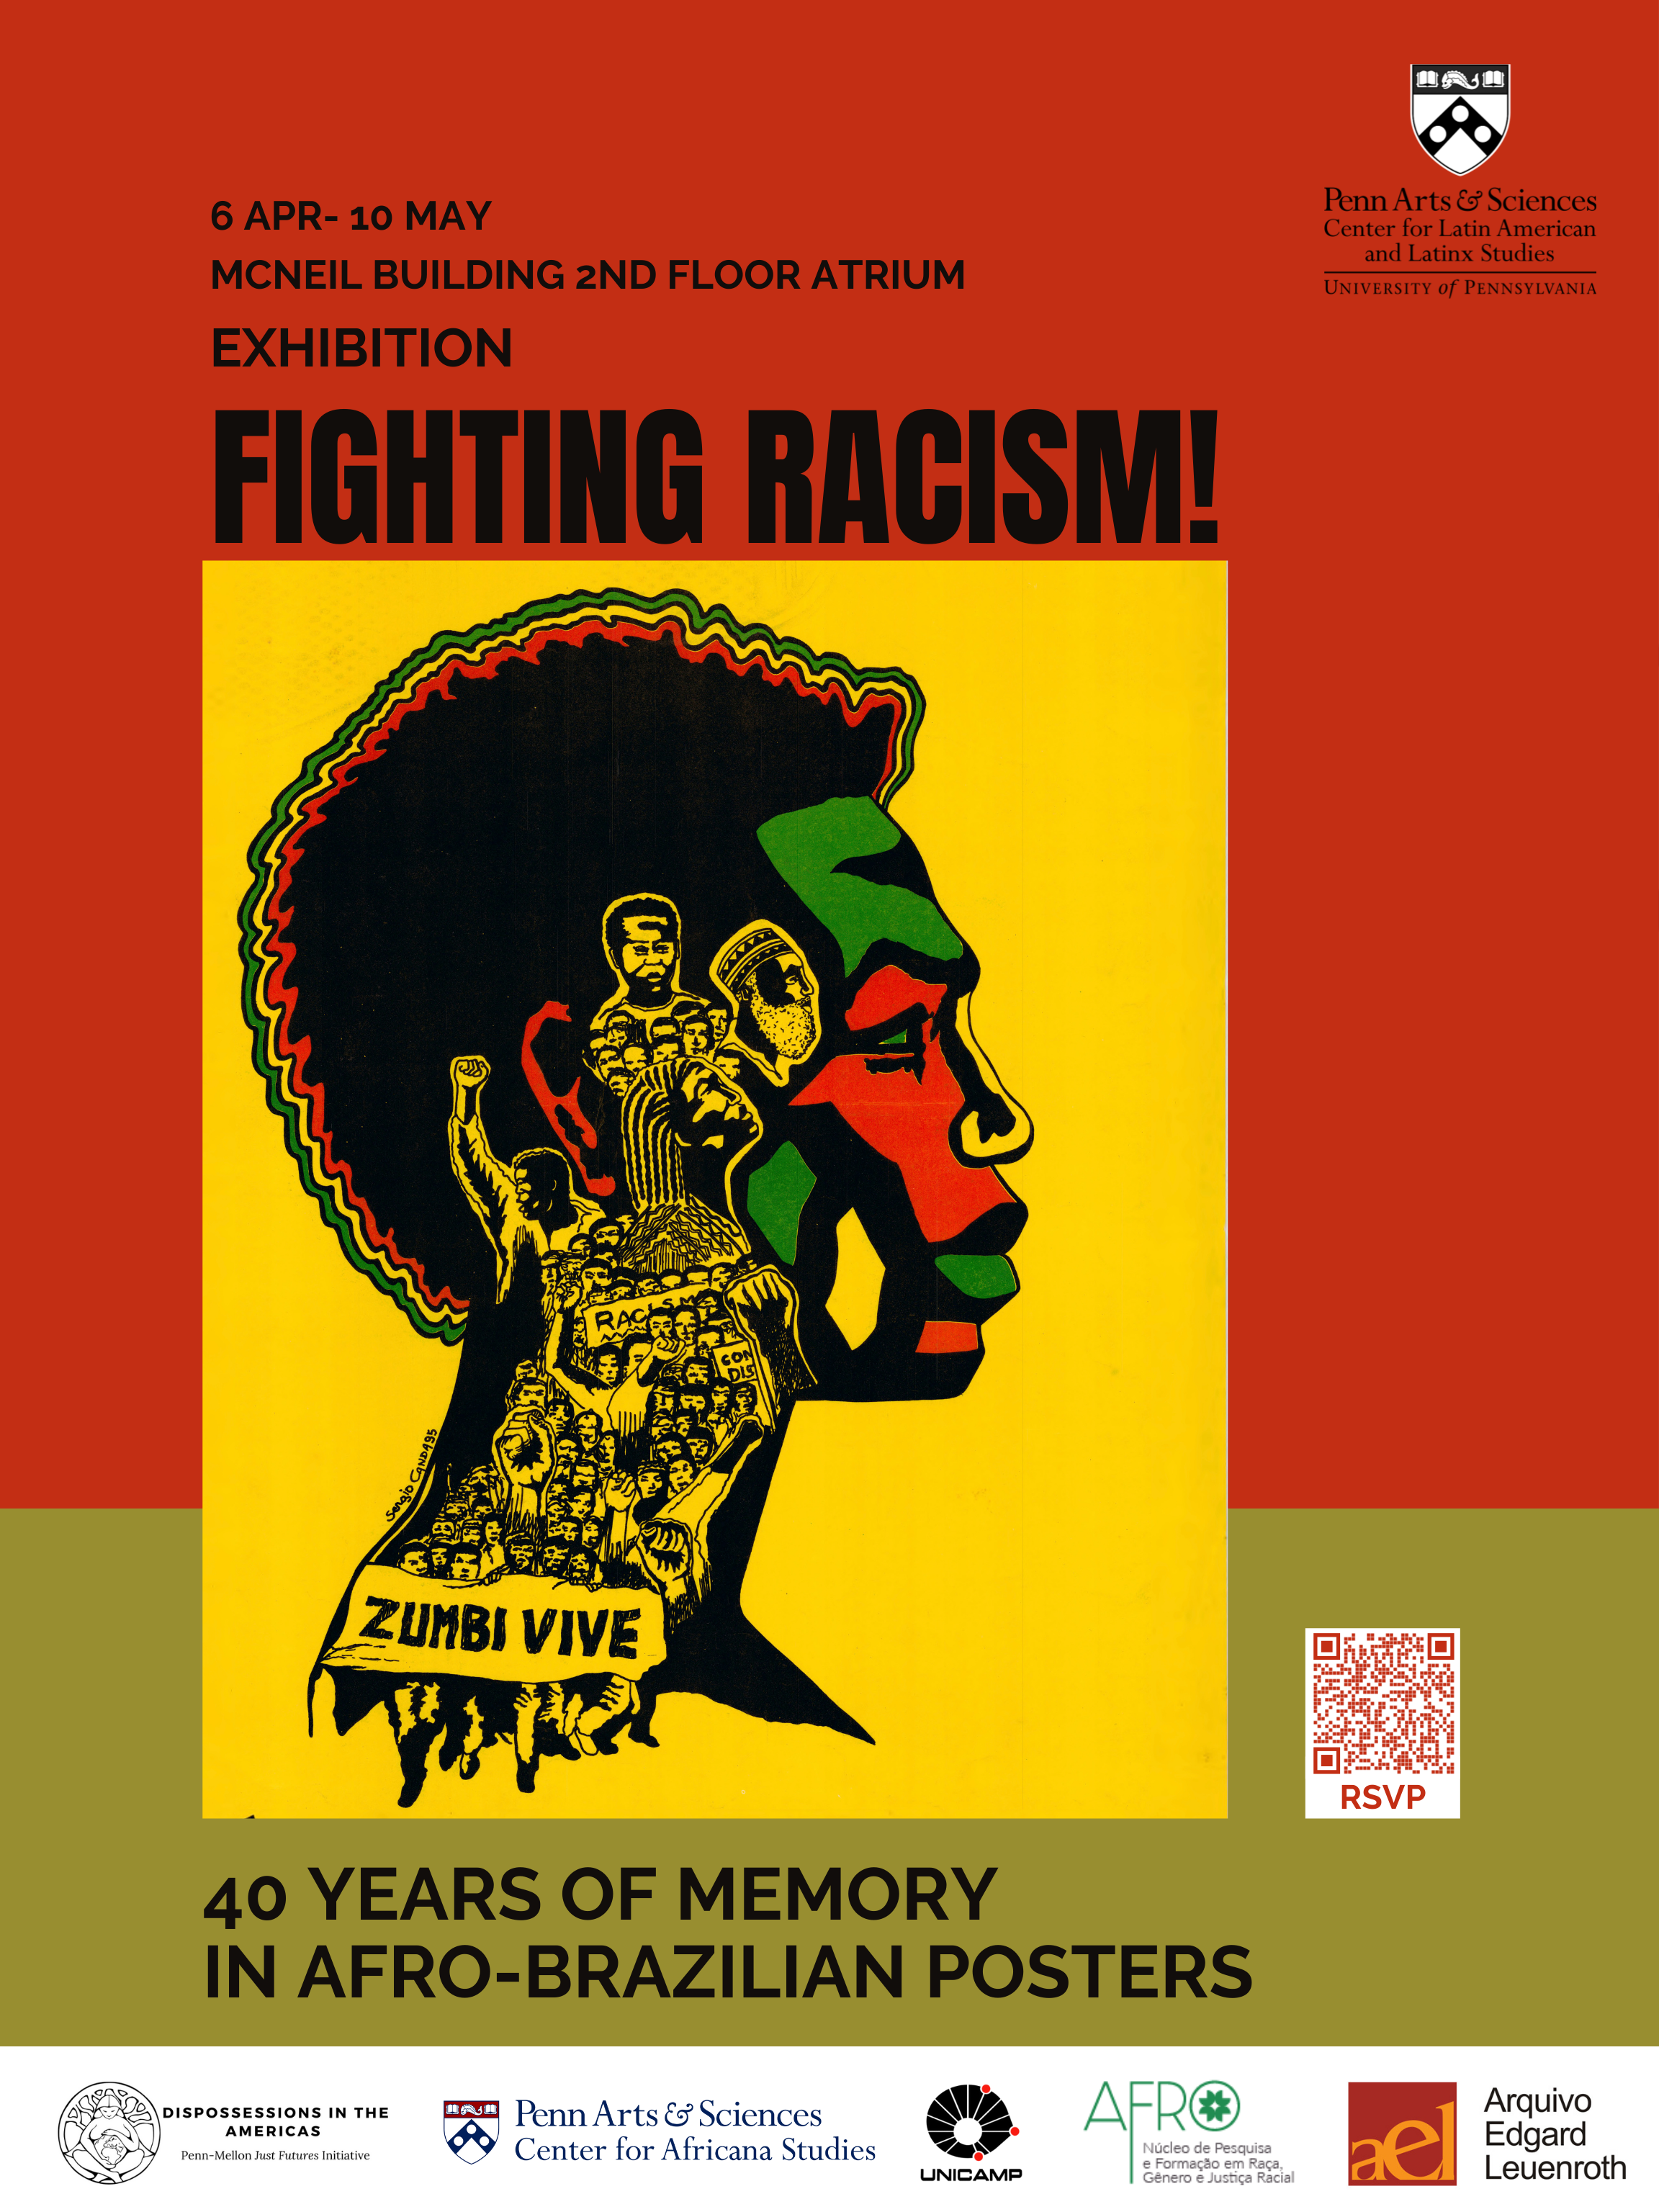 Fighting Racism! 40 Years of Memory in Afro-Brazilian posters